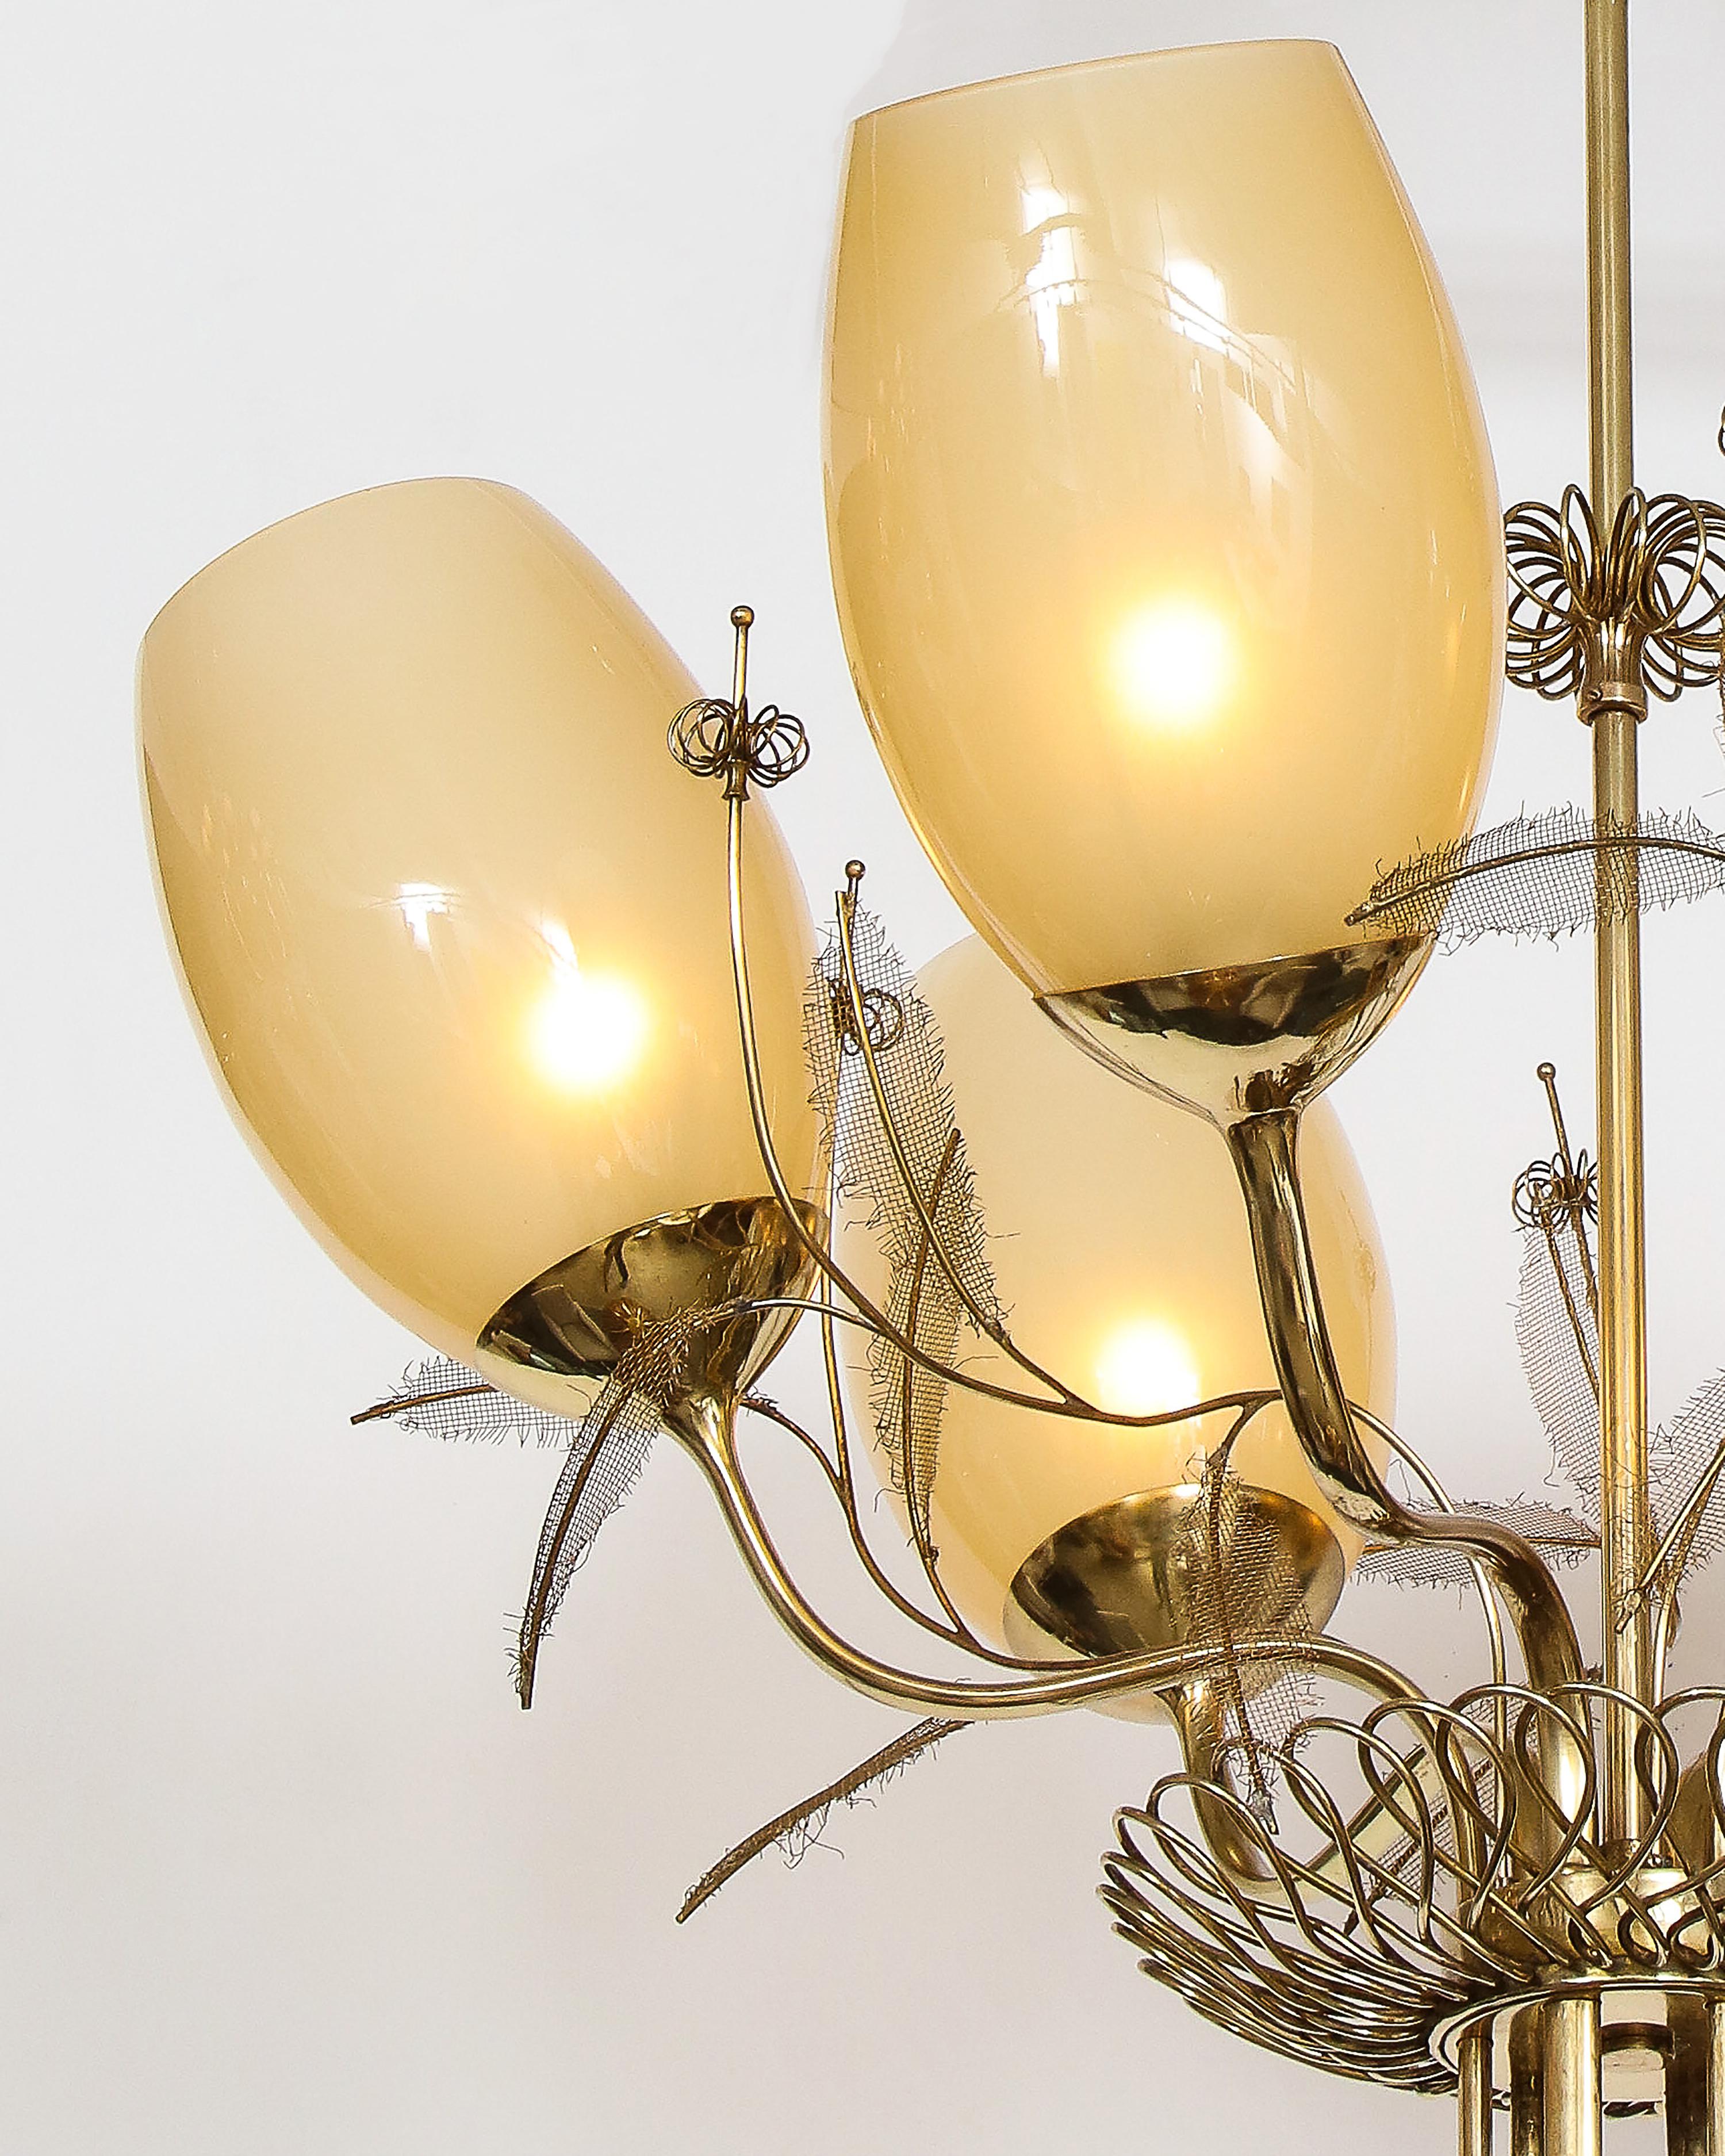 Paavo Tynell for Taito Oy rare and elegant chandelier or ceiling light model 9029/6 with beautifully ornate brass structure holding 6 amber cased glass shades, brass spiral rosette accents and mesh leaf decorations, and original canopy. This